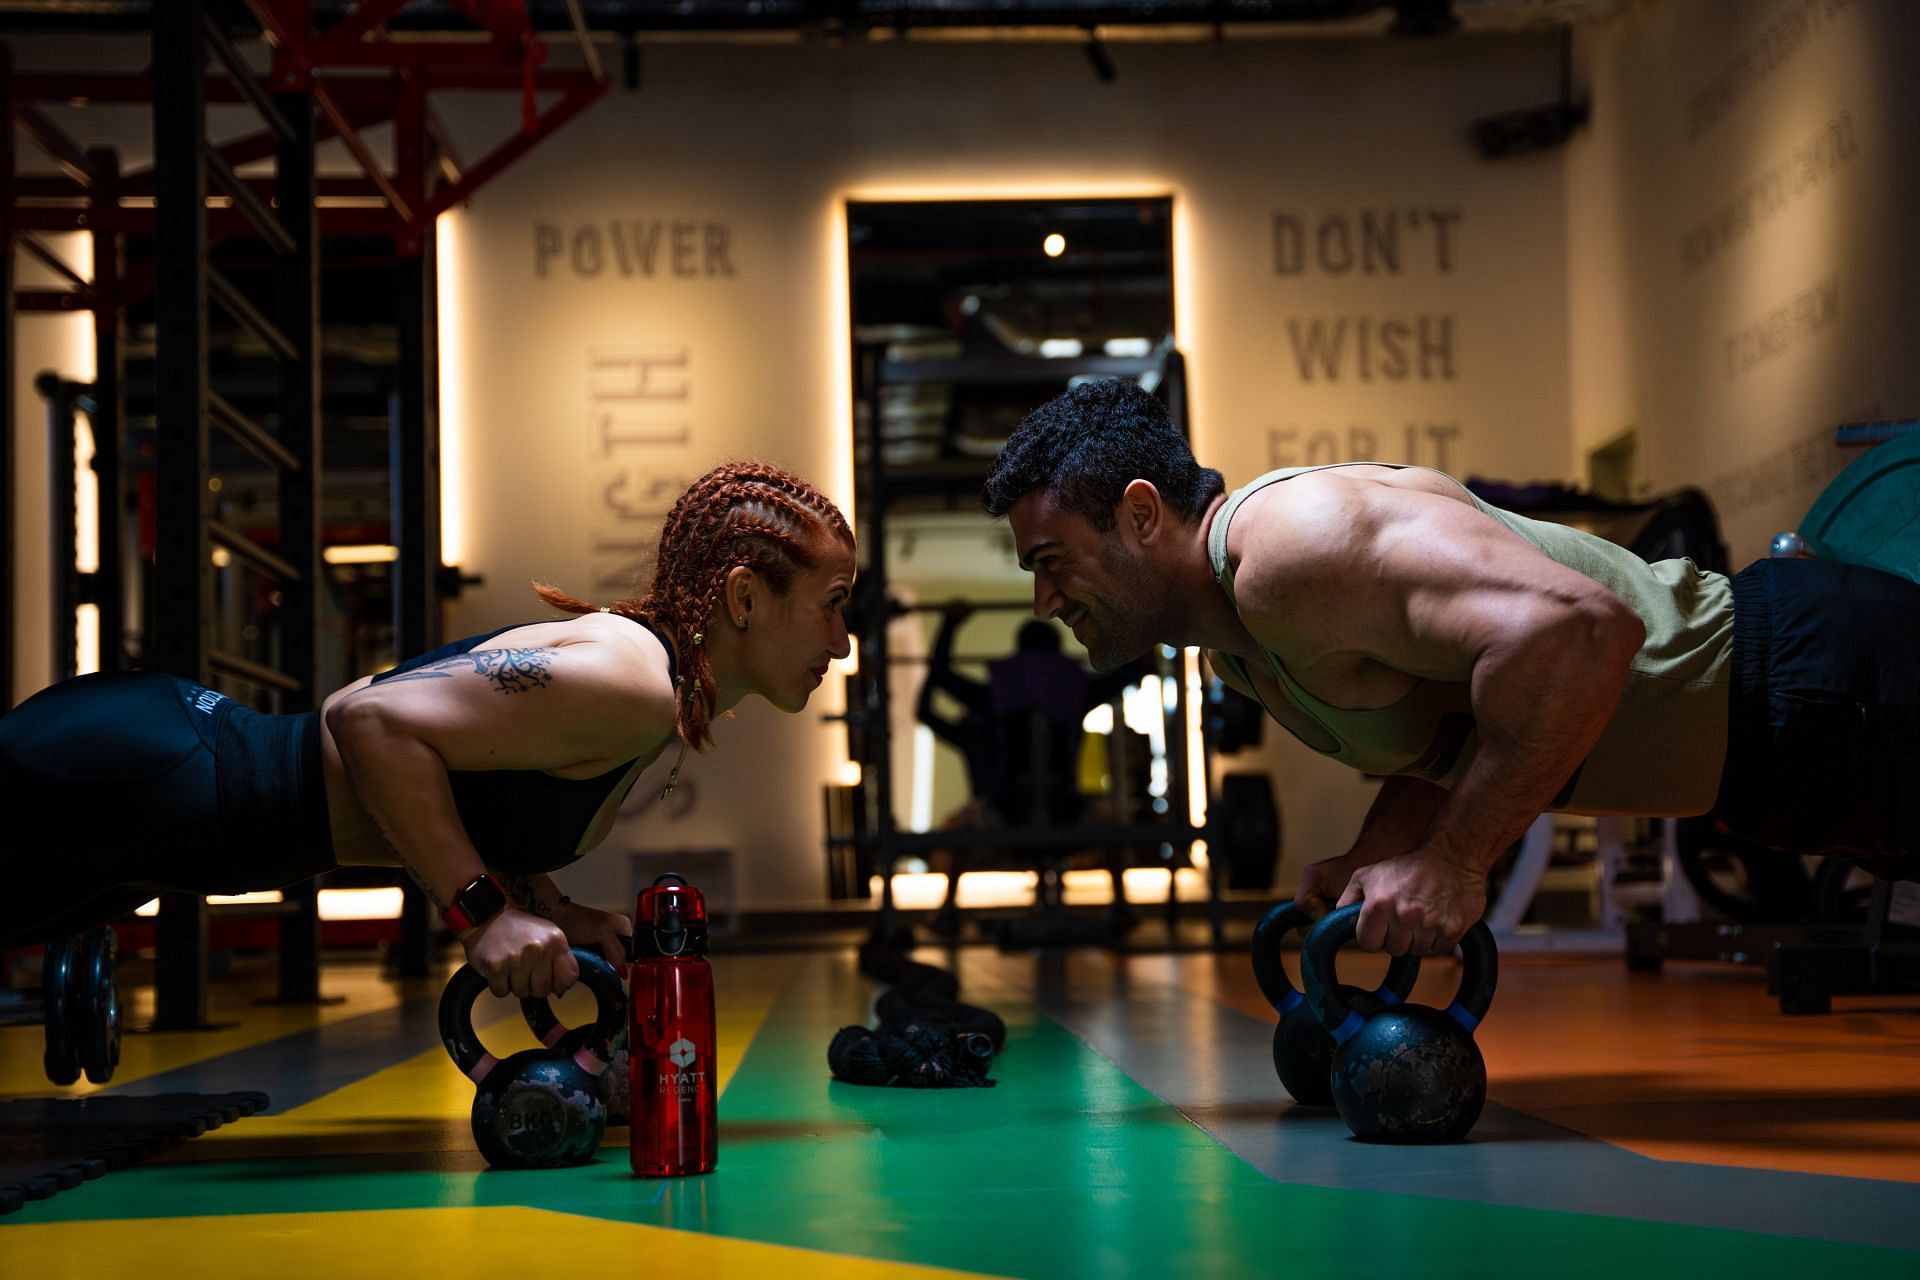 Kettlebell exercises can undoubtedly help you achieve the toned abs. (Image via Unsplash/ Akram Huseyn)